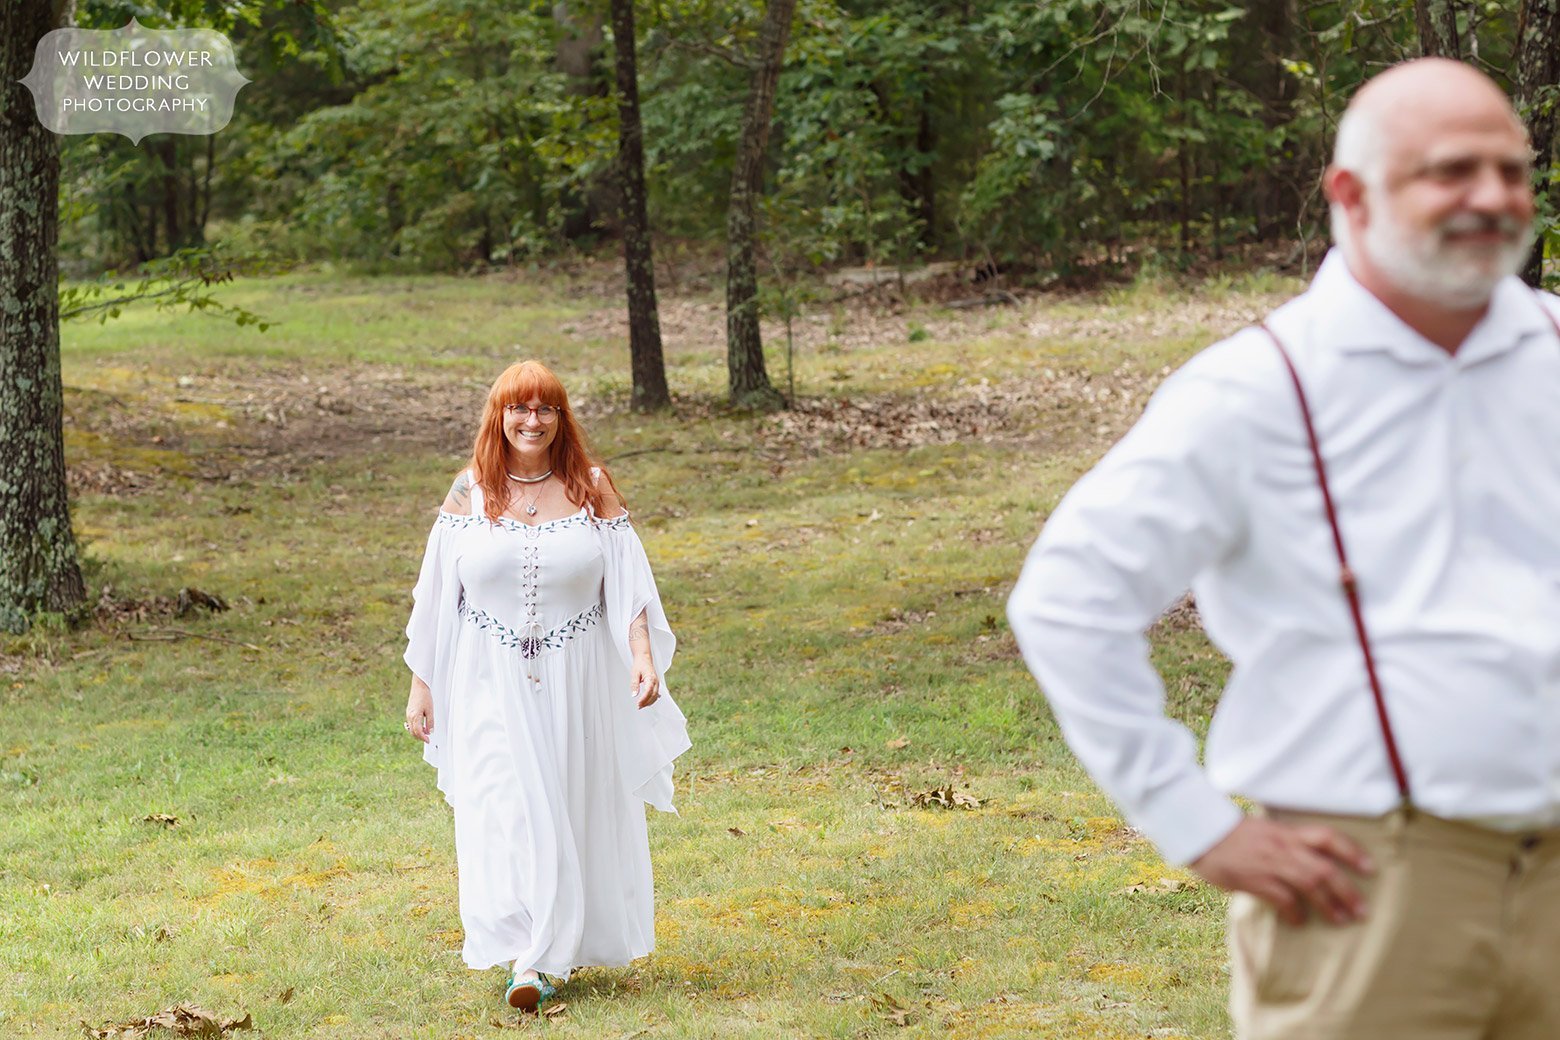 Bride walks into a field for the first look at this Missouri backyard wedding.